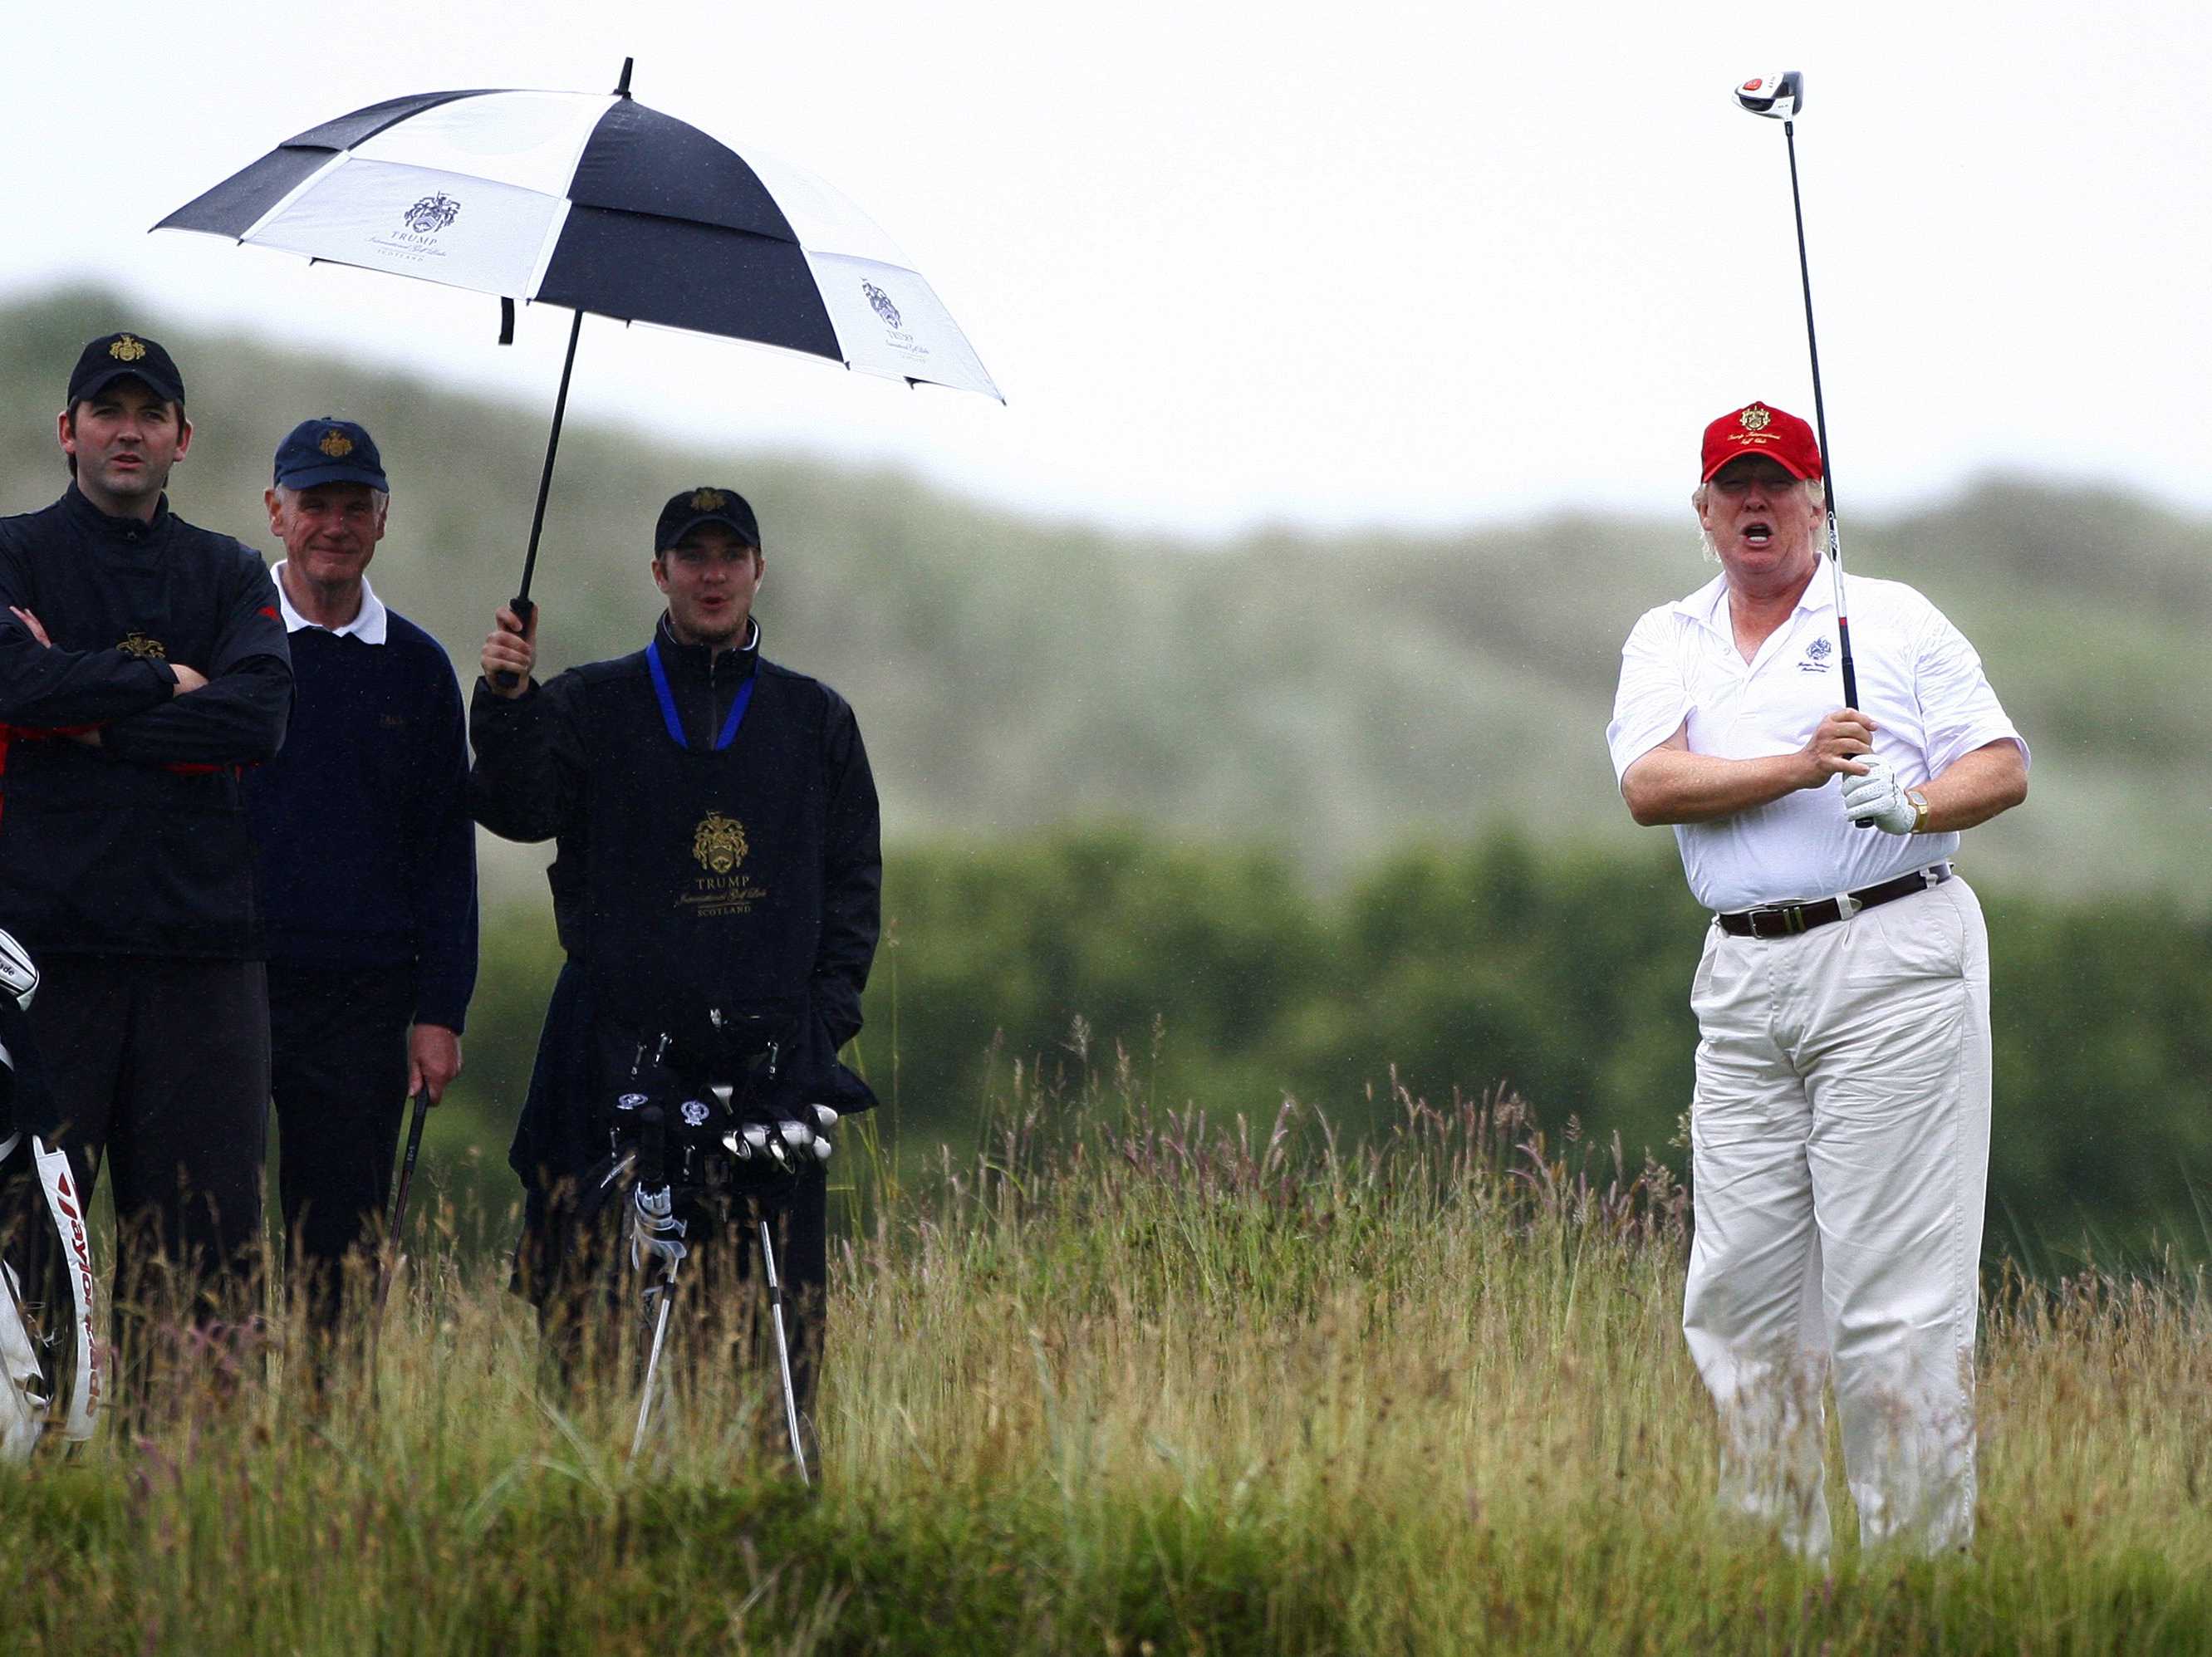 'I was the best golfer of all the rich people': In meeting with manufacturing CEOs, Trump insists GE's Jeff Immelt ... - Business Insider